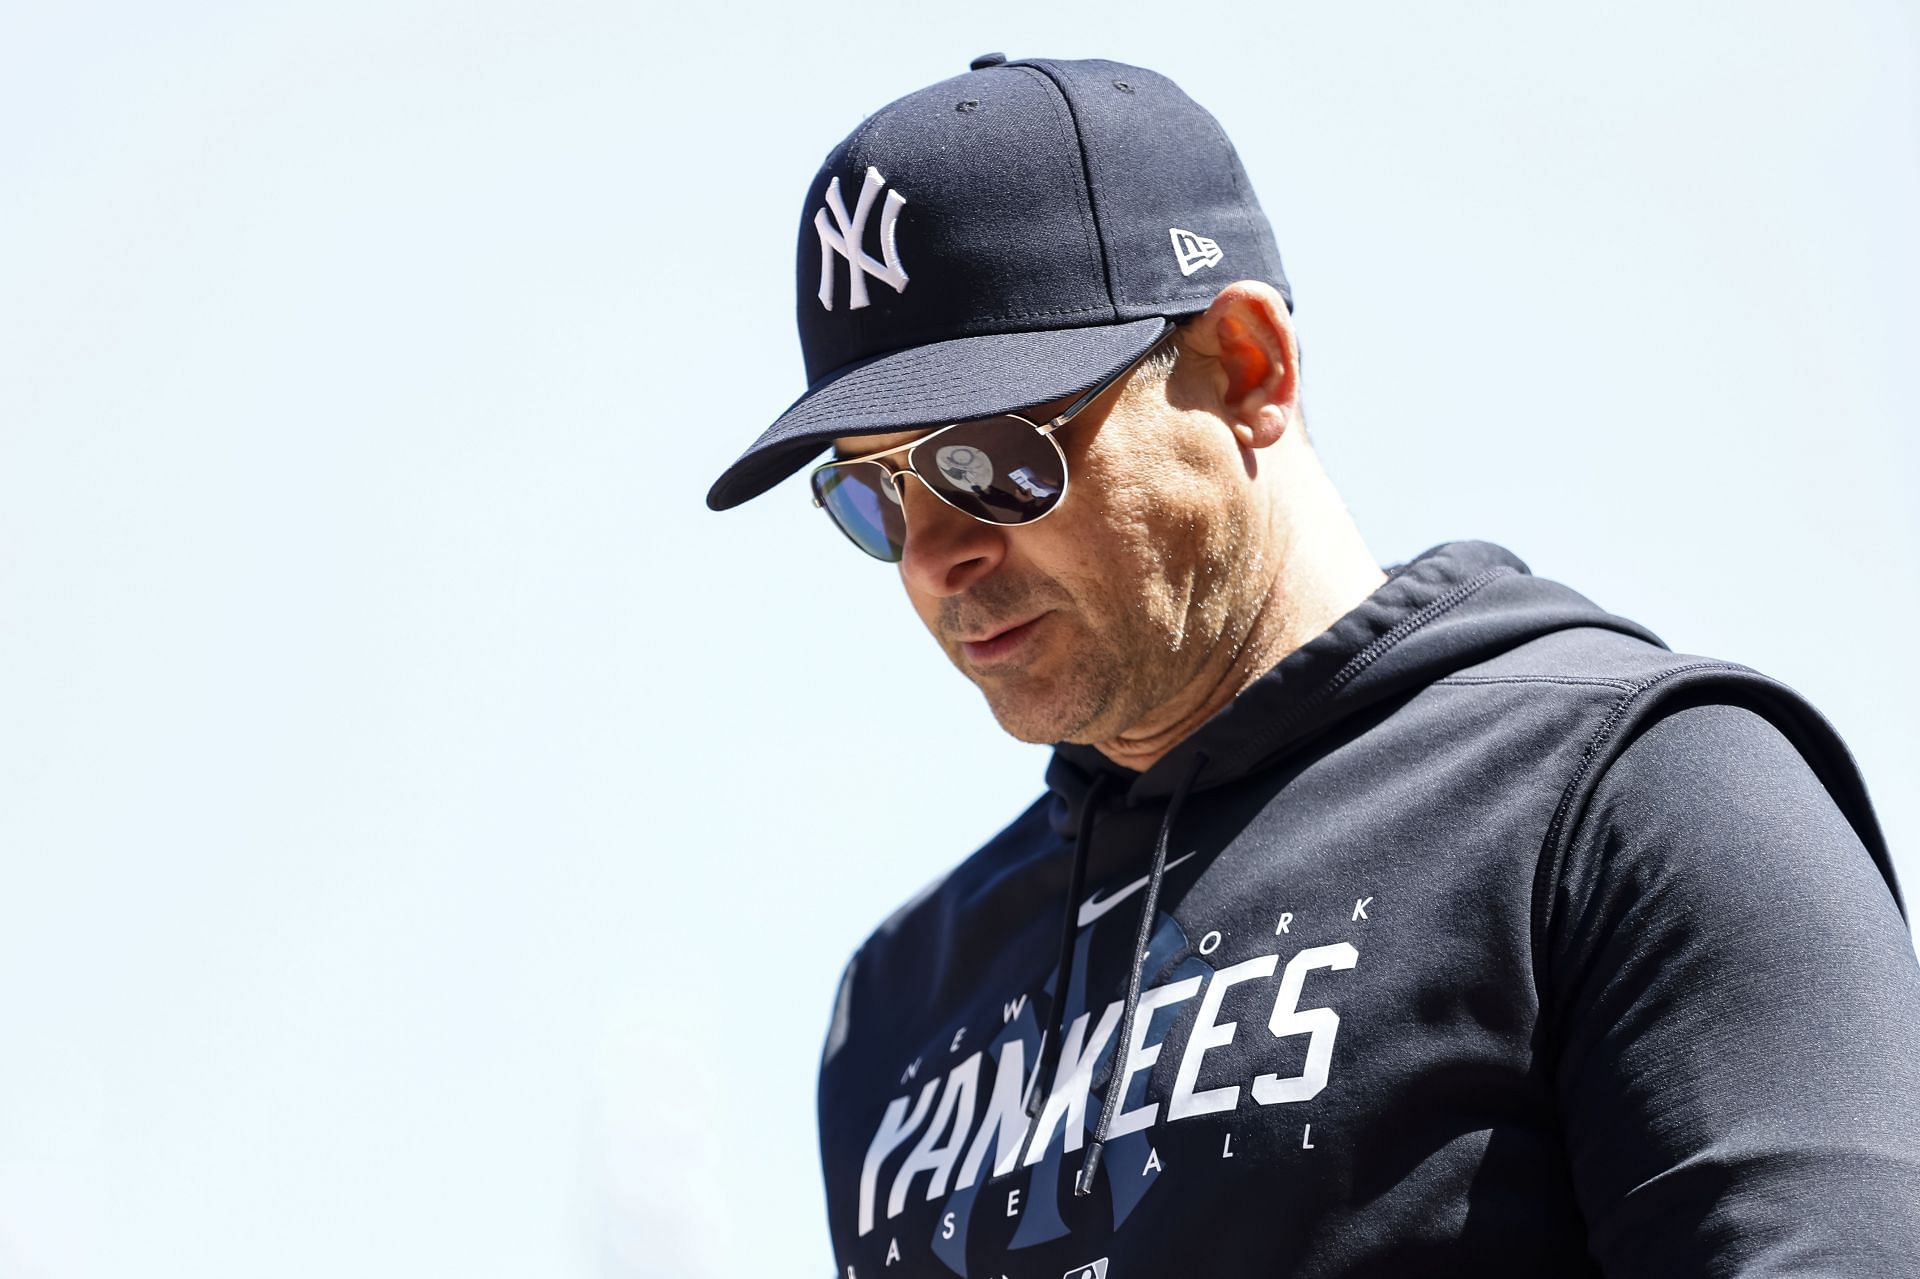 Aaron Boone's No. 17? It's Personal, Not Motivational - The New